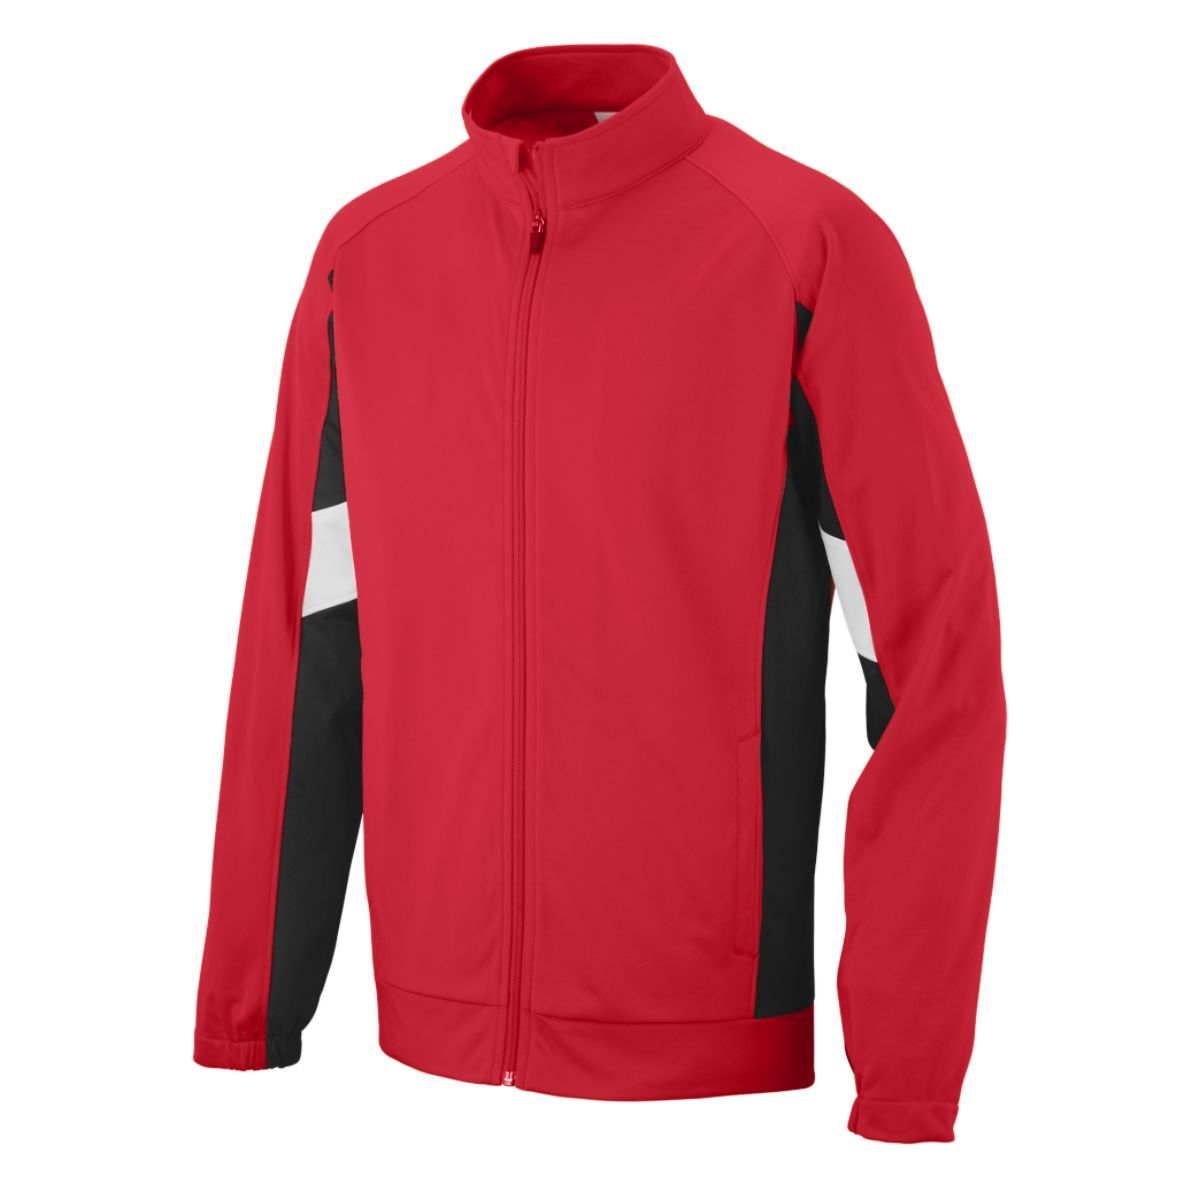 Augusta Sportswear Tour De Force Jacket in Red/Black/White  -Part of the Adult, Adult-Jacket, Augusta-Products, Outerwear product lines at KanaleyCreations.com